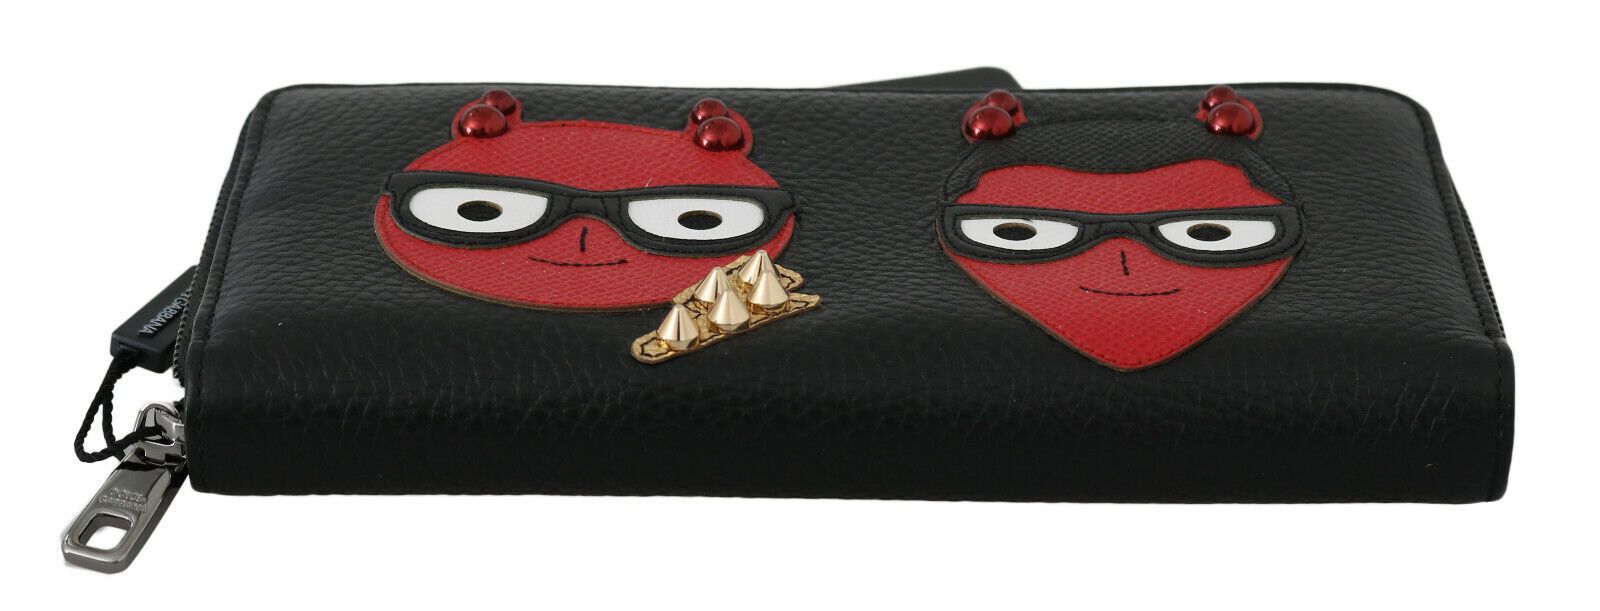 Chic Black and Red Leather Continental Wallet